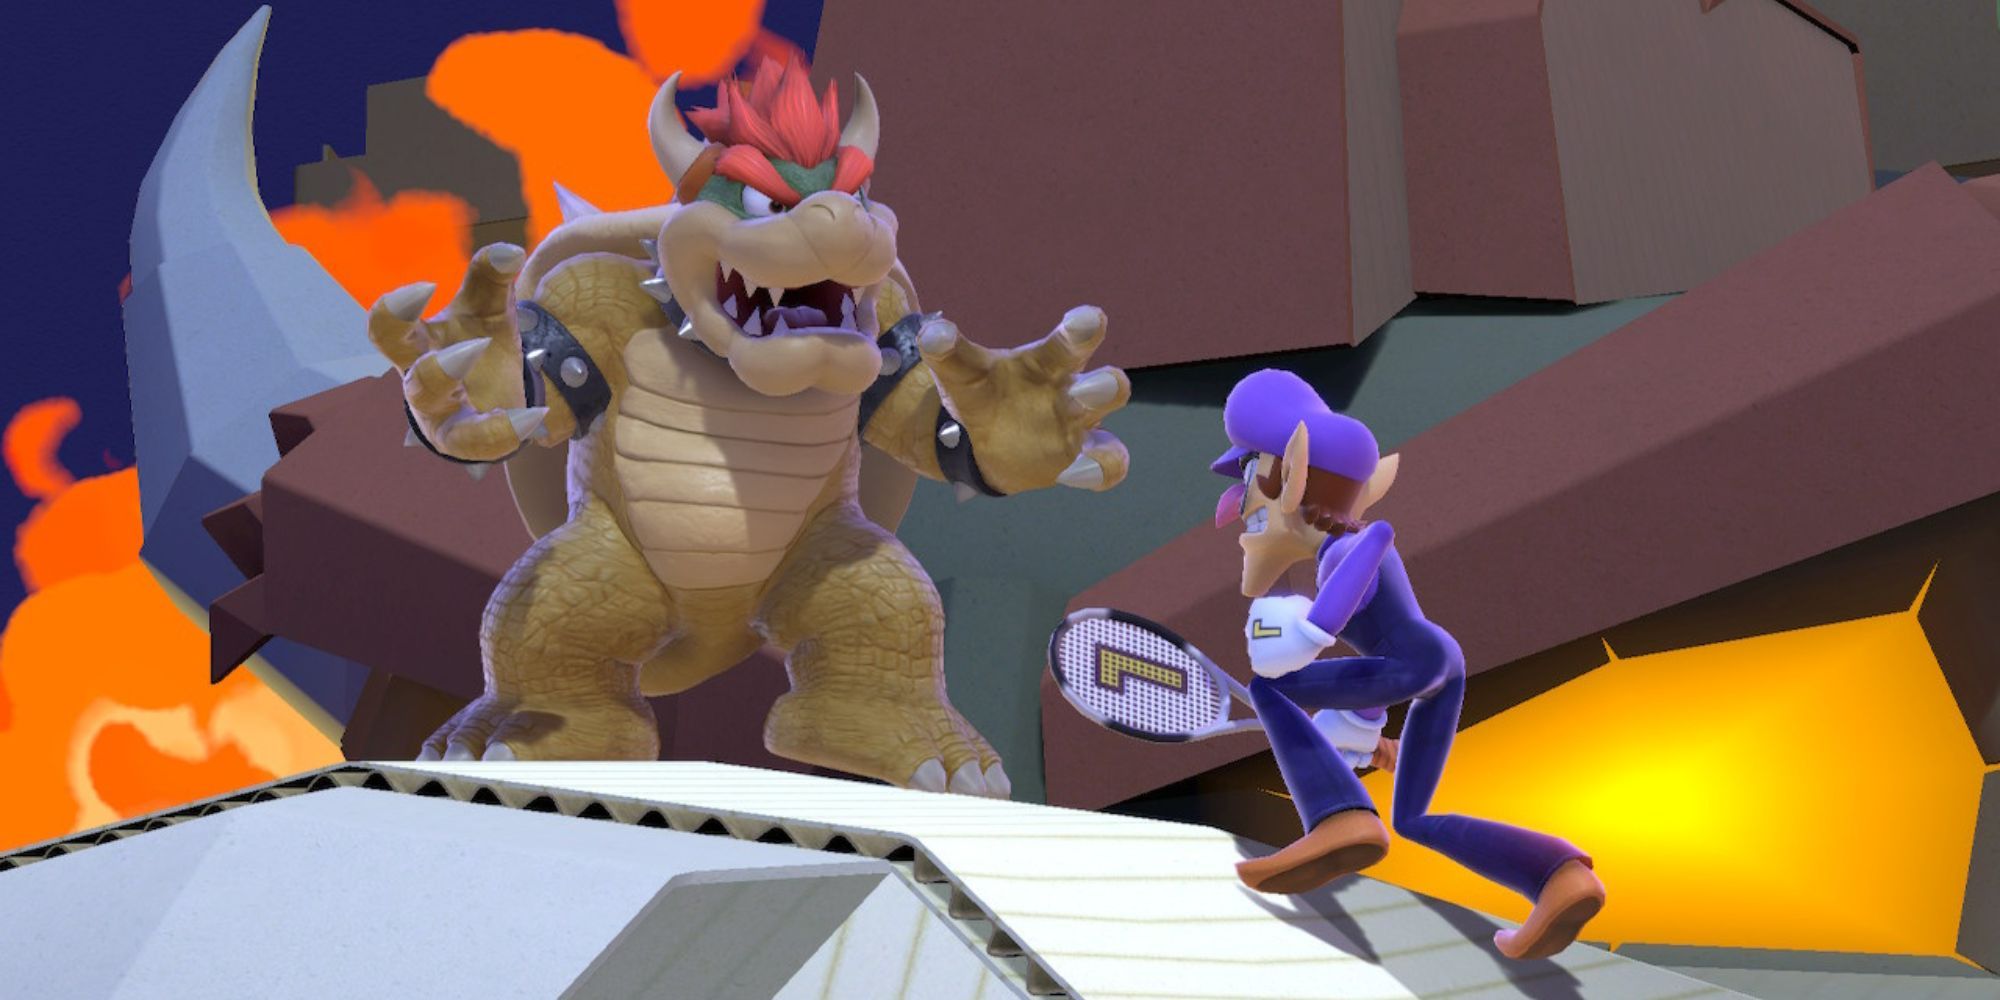 Bowser stands over a Waluigi assist trophy on Paper Mario stage